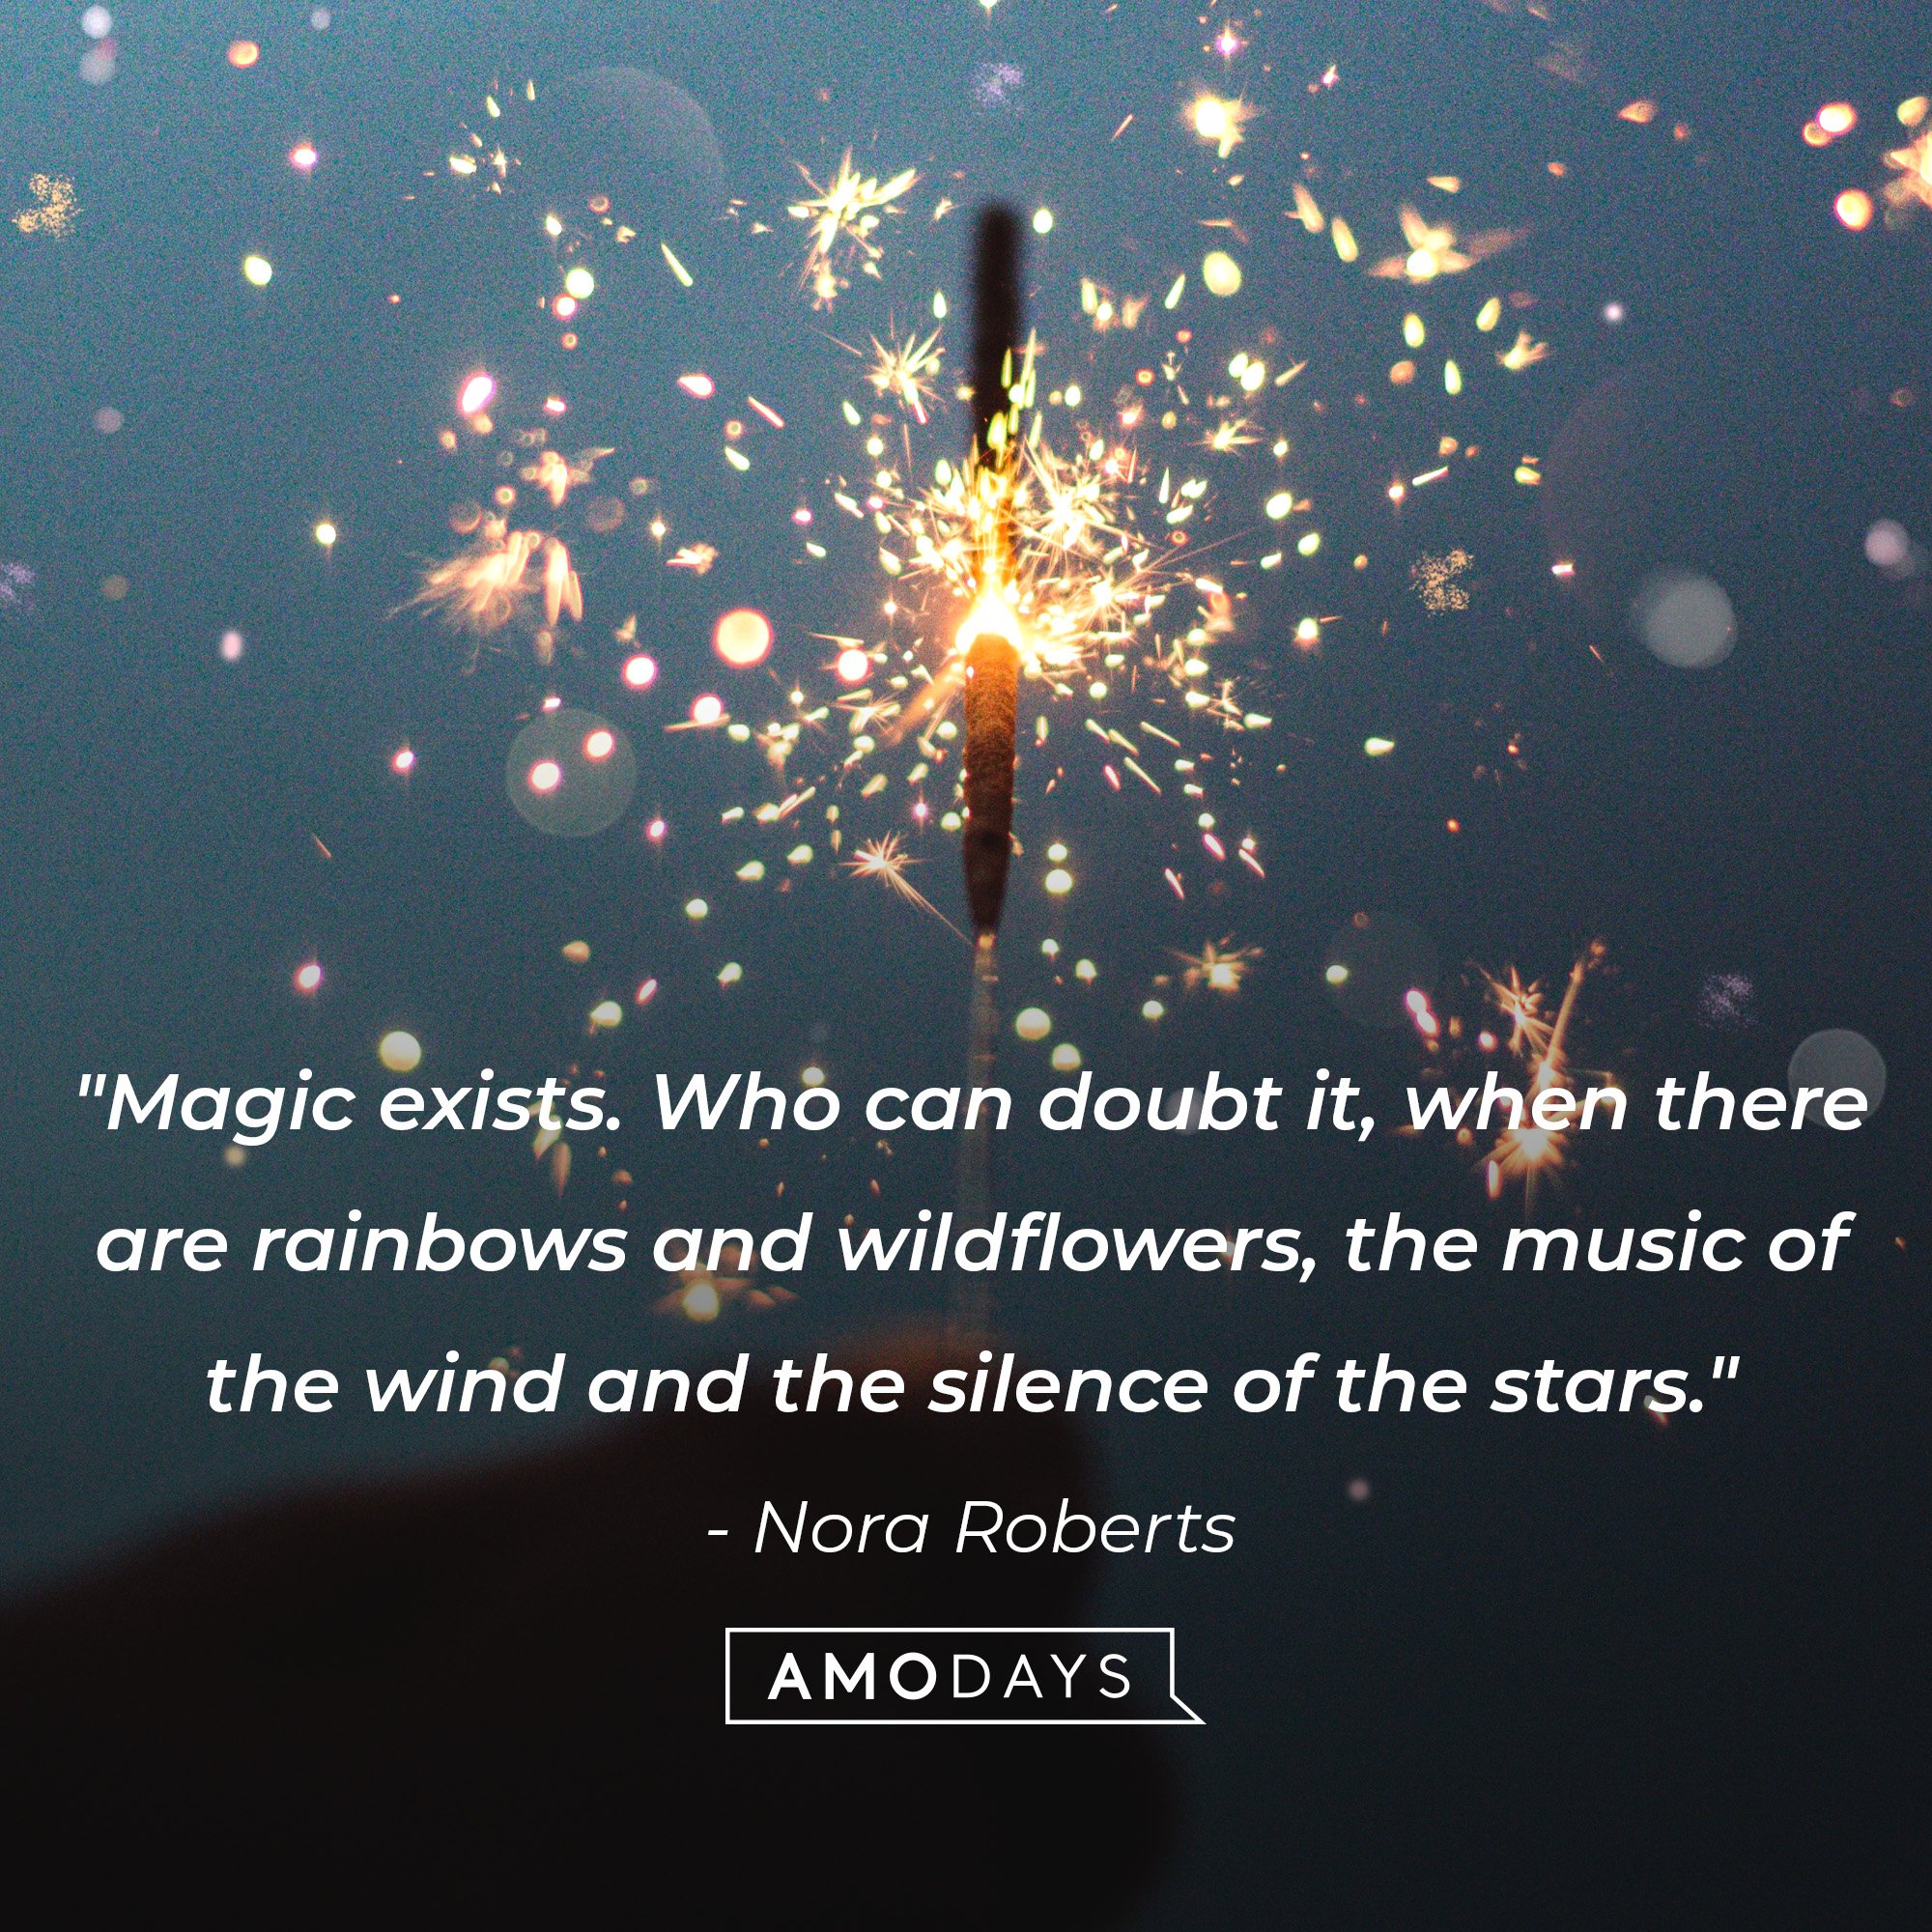 Nora Roberts’ quote: “Magic exists. Who can doubt it when there are rainbows and wildflowers, the music of the wind, and the silence of the stars?"  | Image: AmoDays